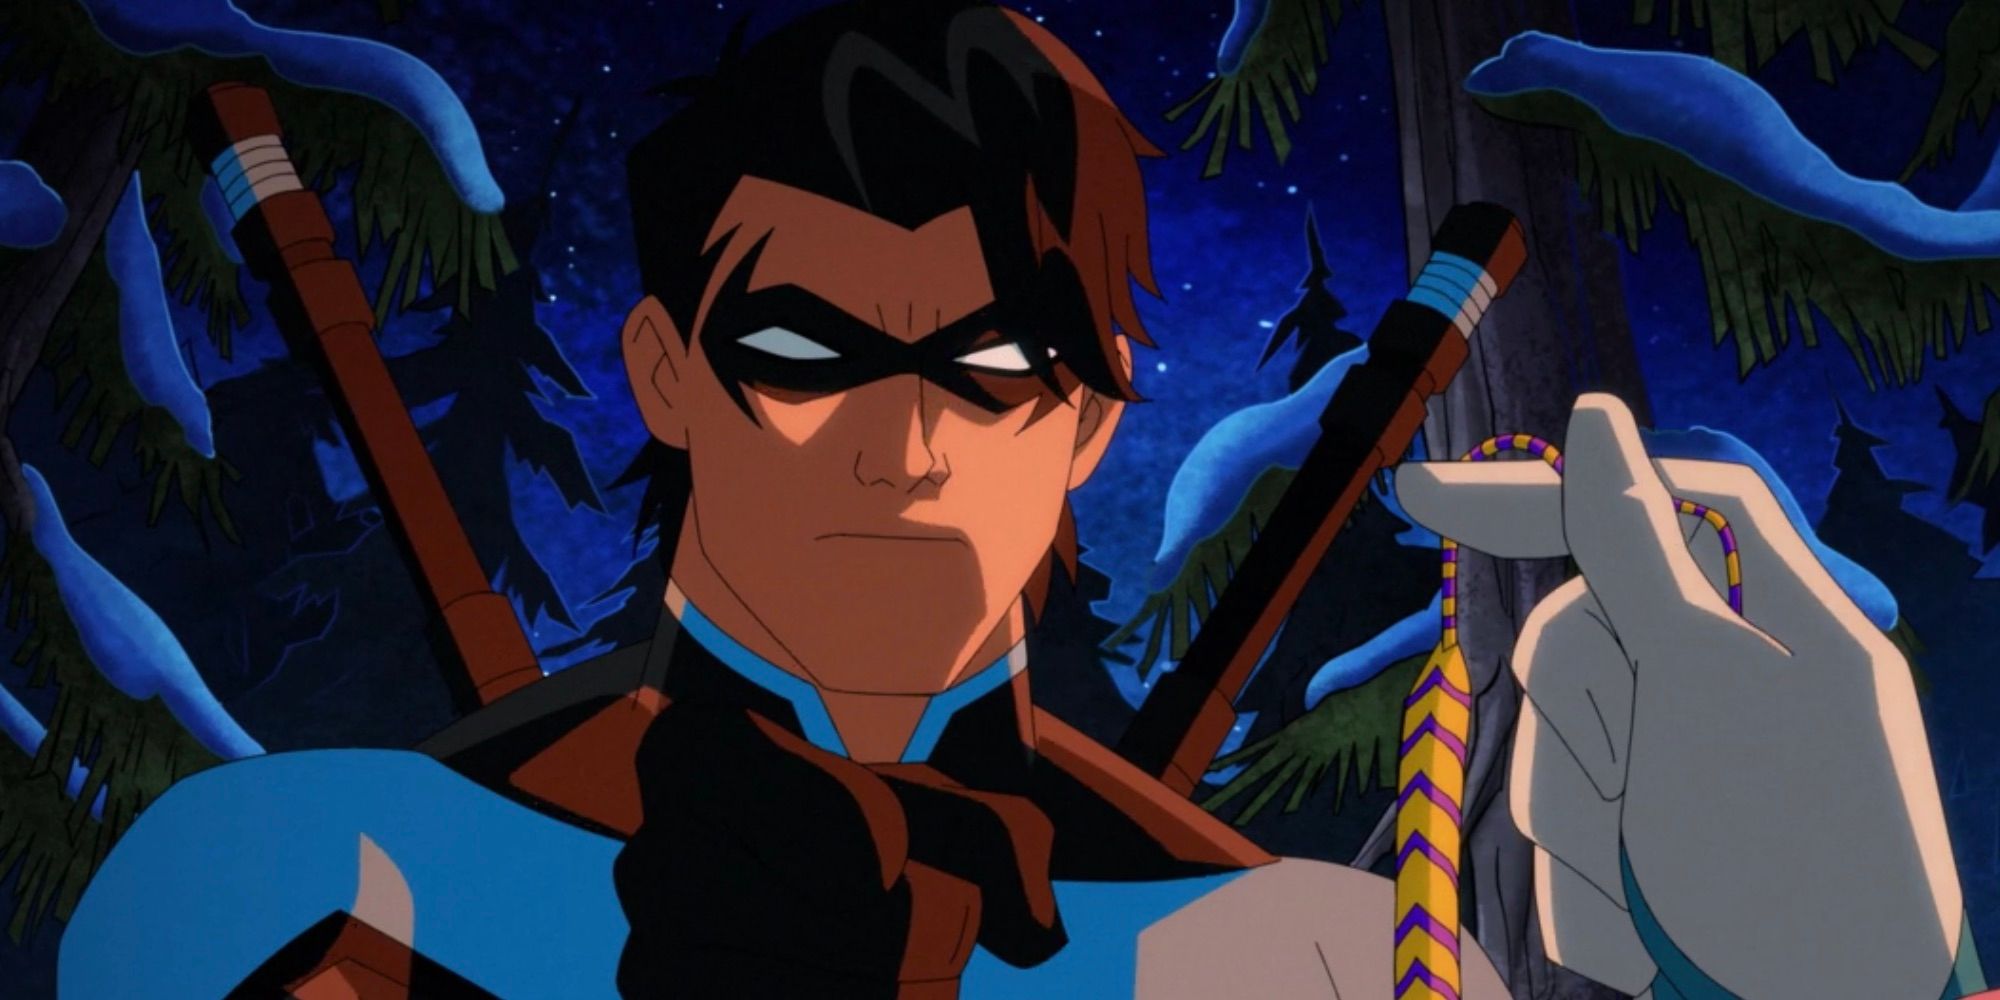 Exclusive: Nightwing Animated Movie In The Works | GIANT FREAKIN ROBOT